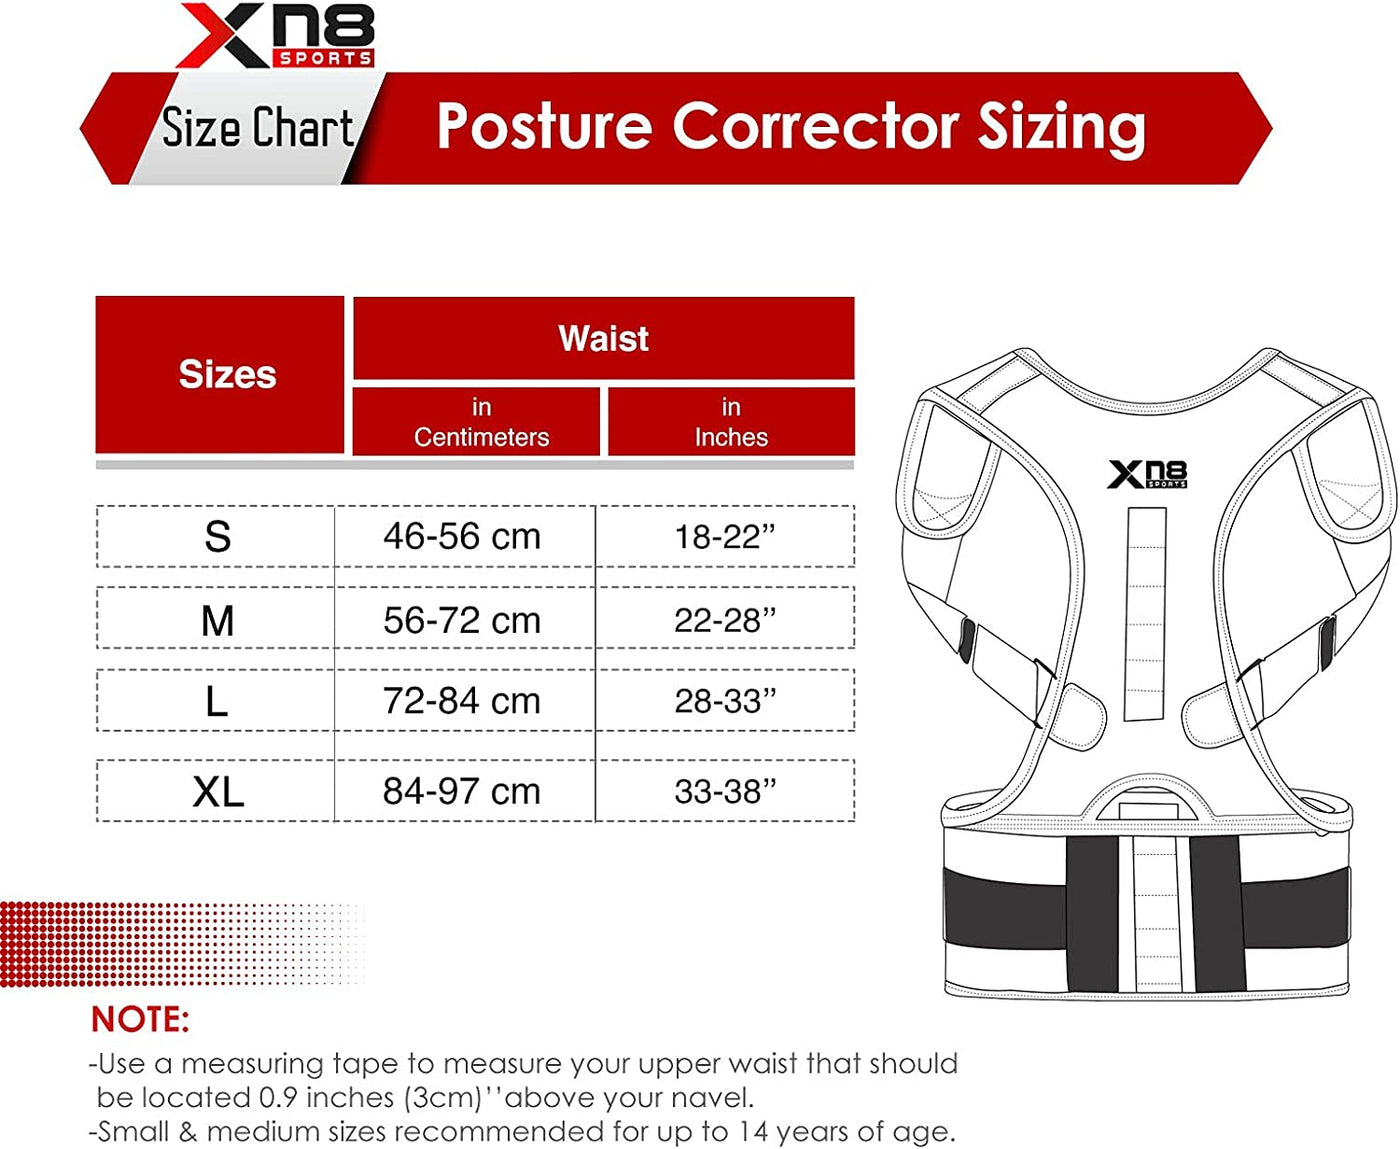 Xn8 Sports Back Support Belt B107 - Posture Corrector for Neck-Back and Shoulder Pain Relief - Lumbar Support